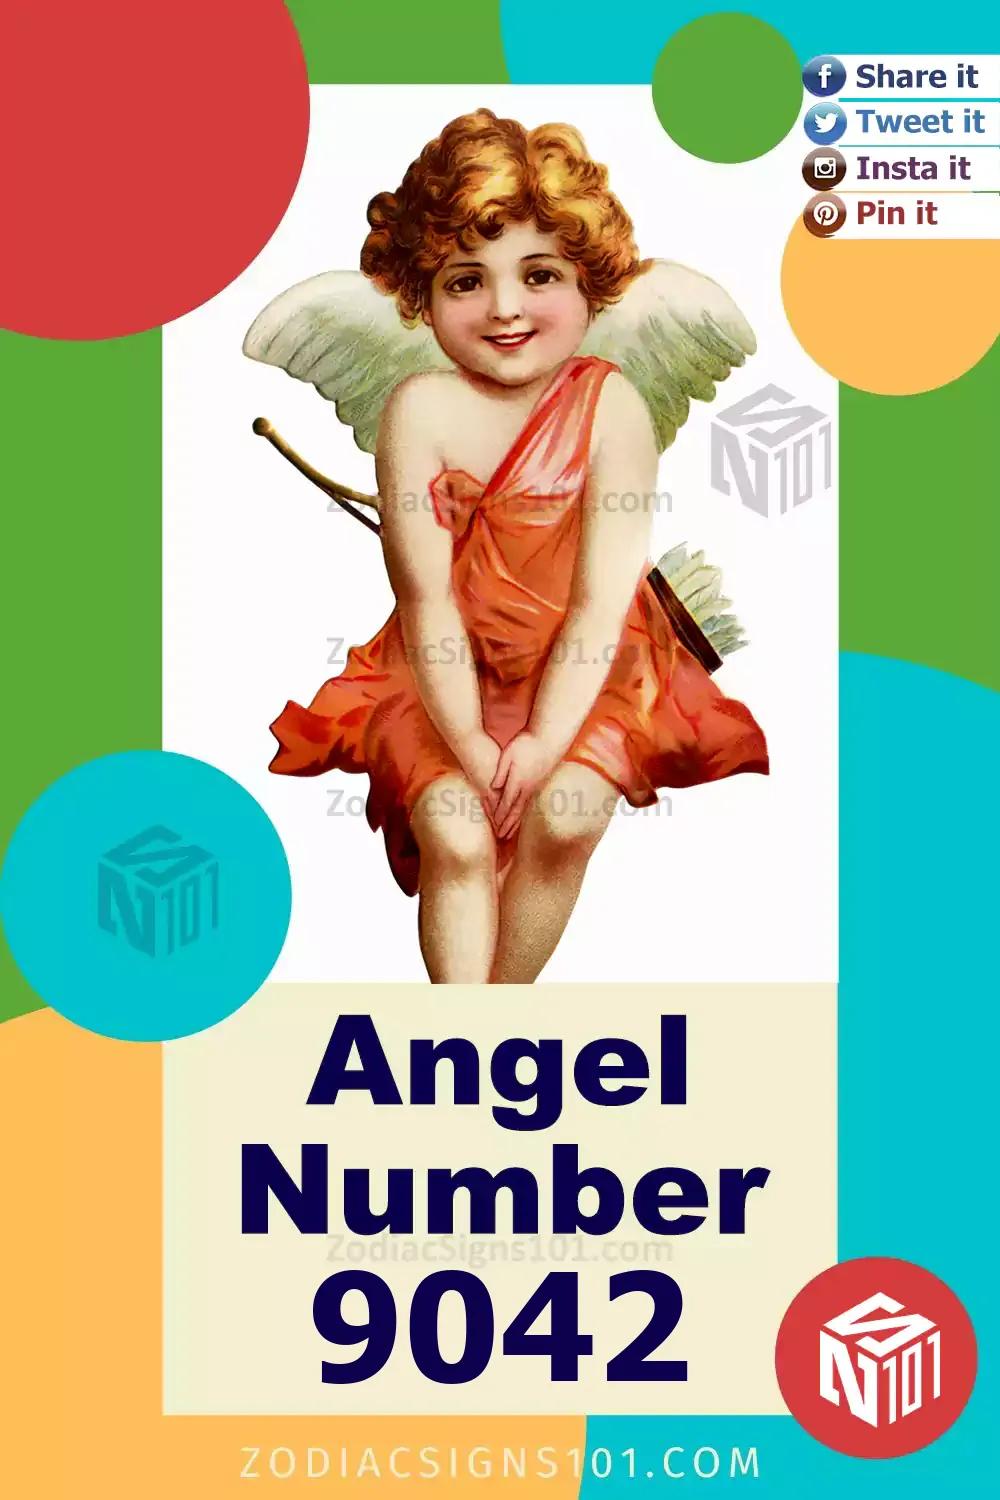 9042 Angel Number Meaning